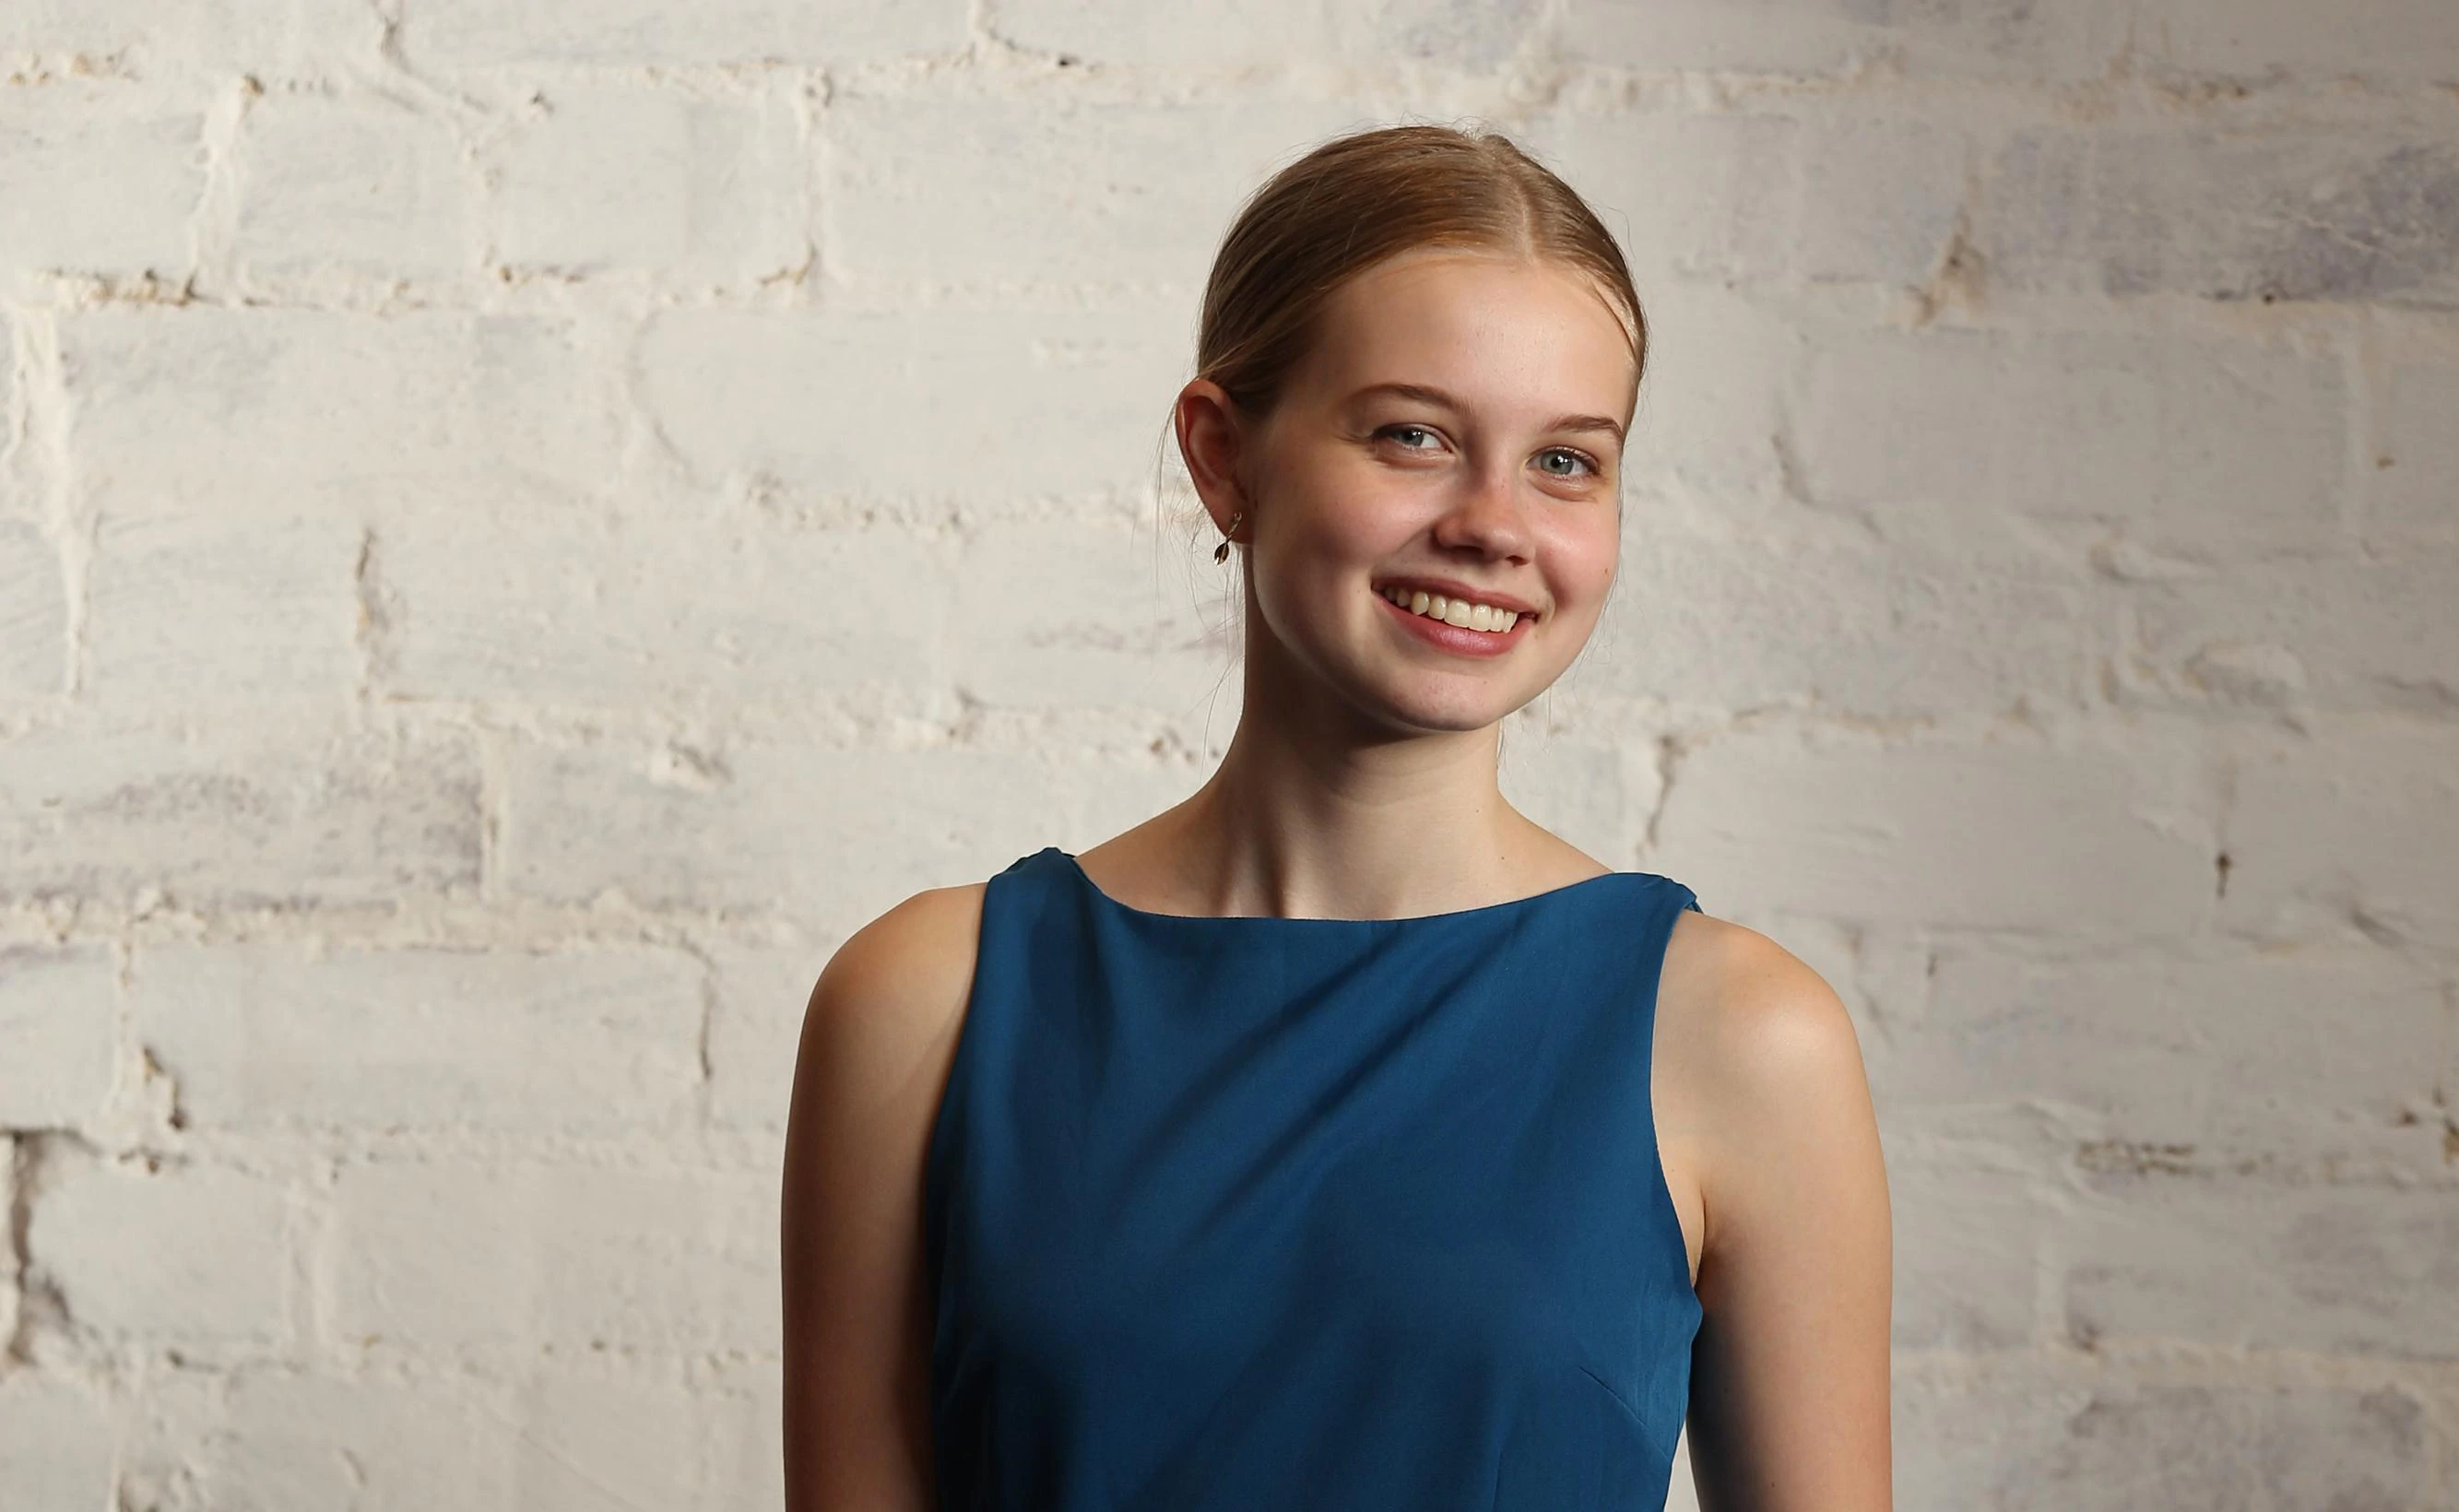 Angourie Rice Wallpapers